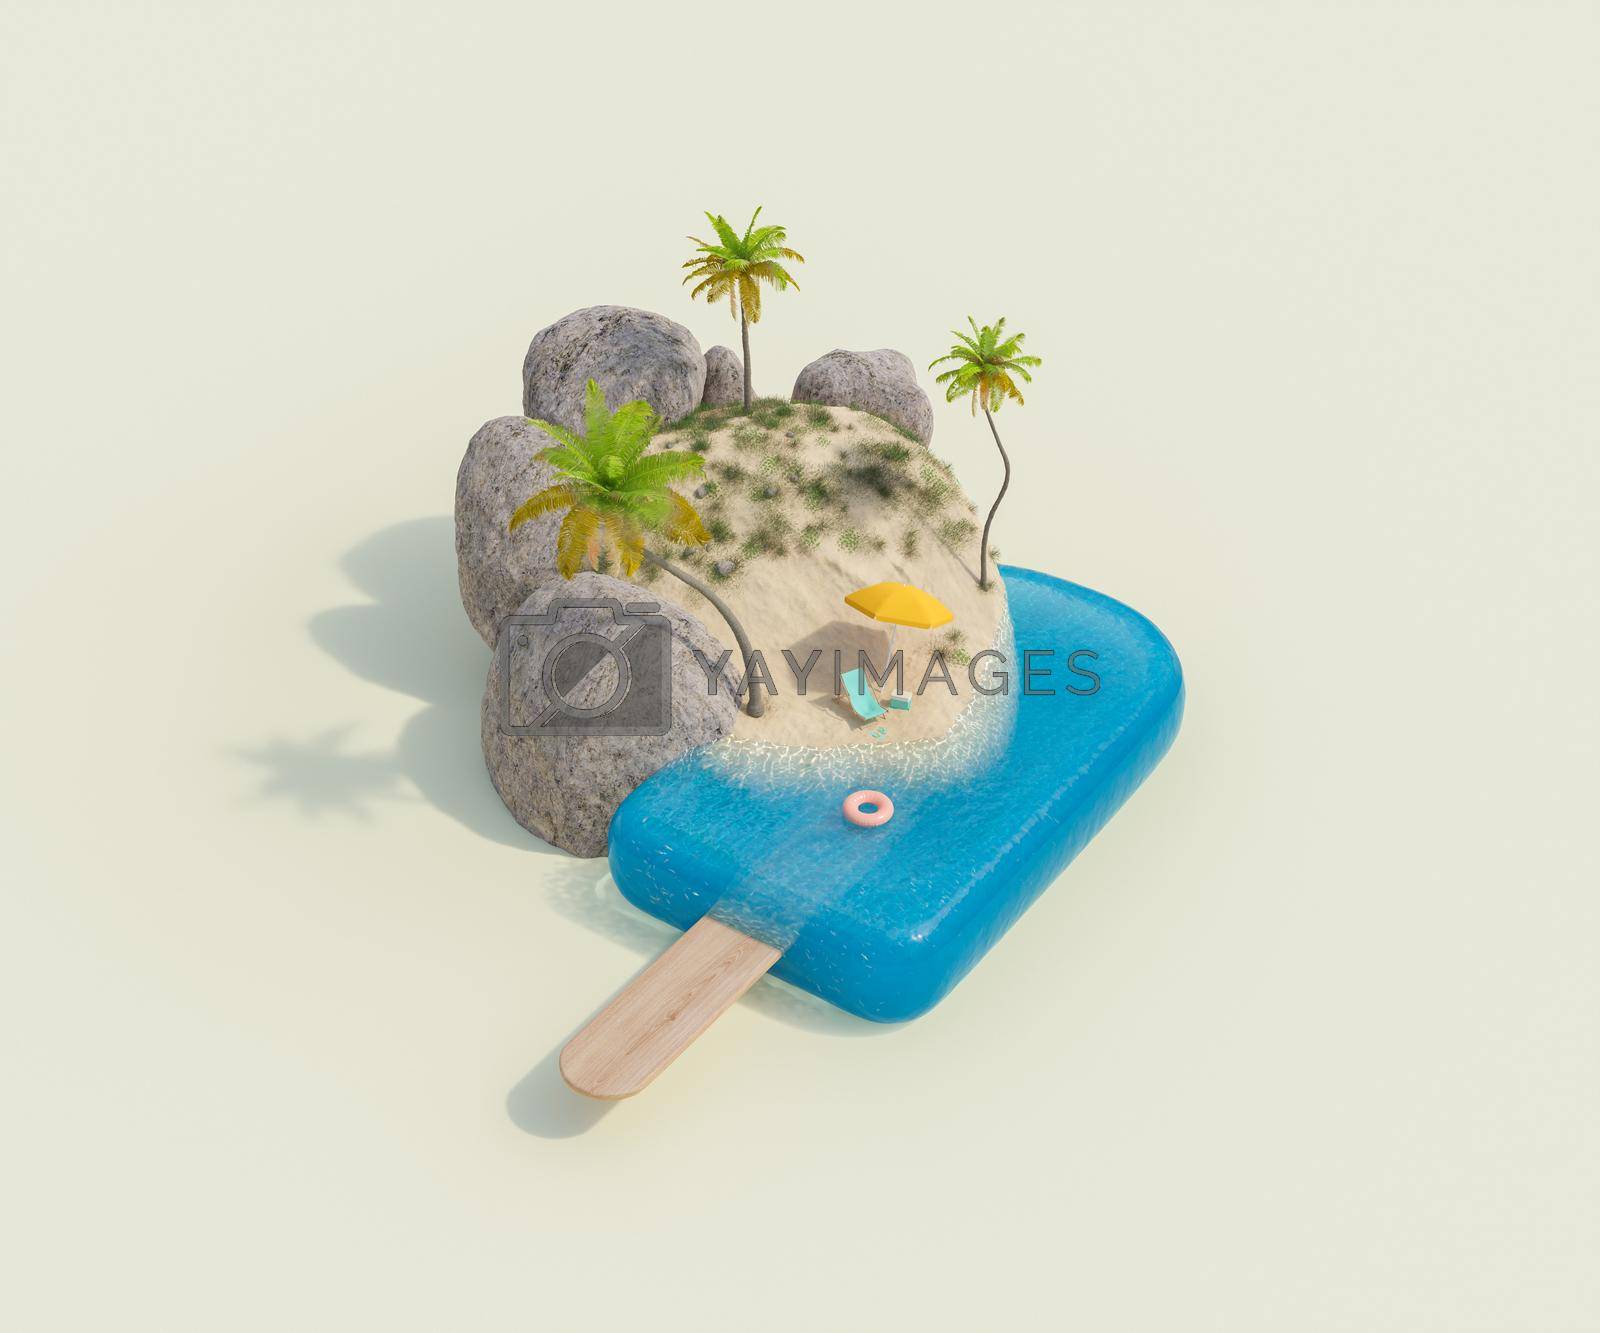 Royalty free image of ice cream with a beach and vacation accessories by asolano